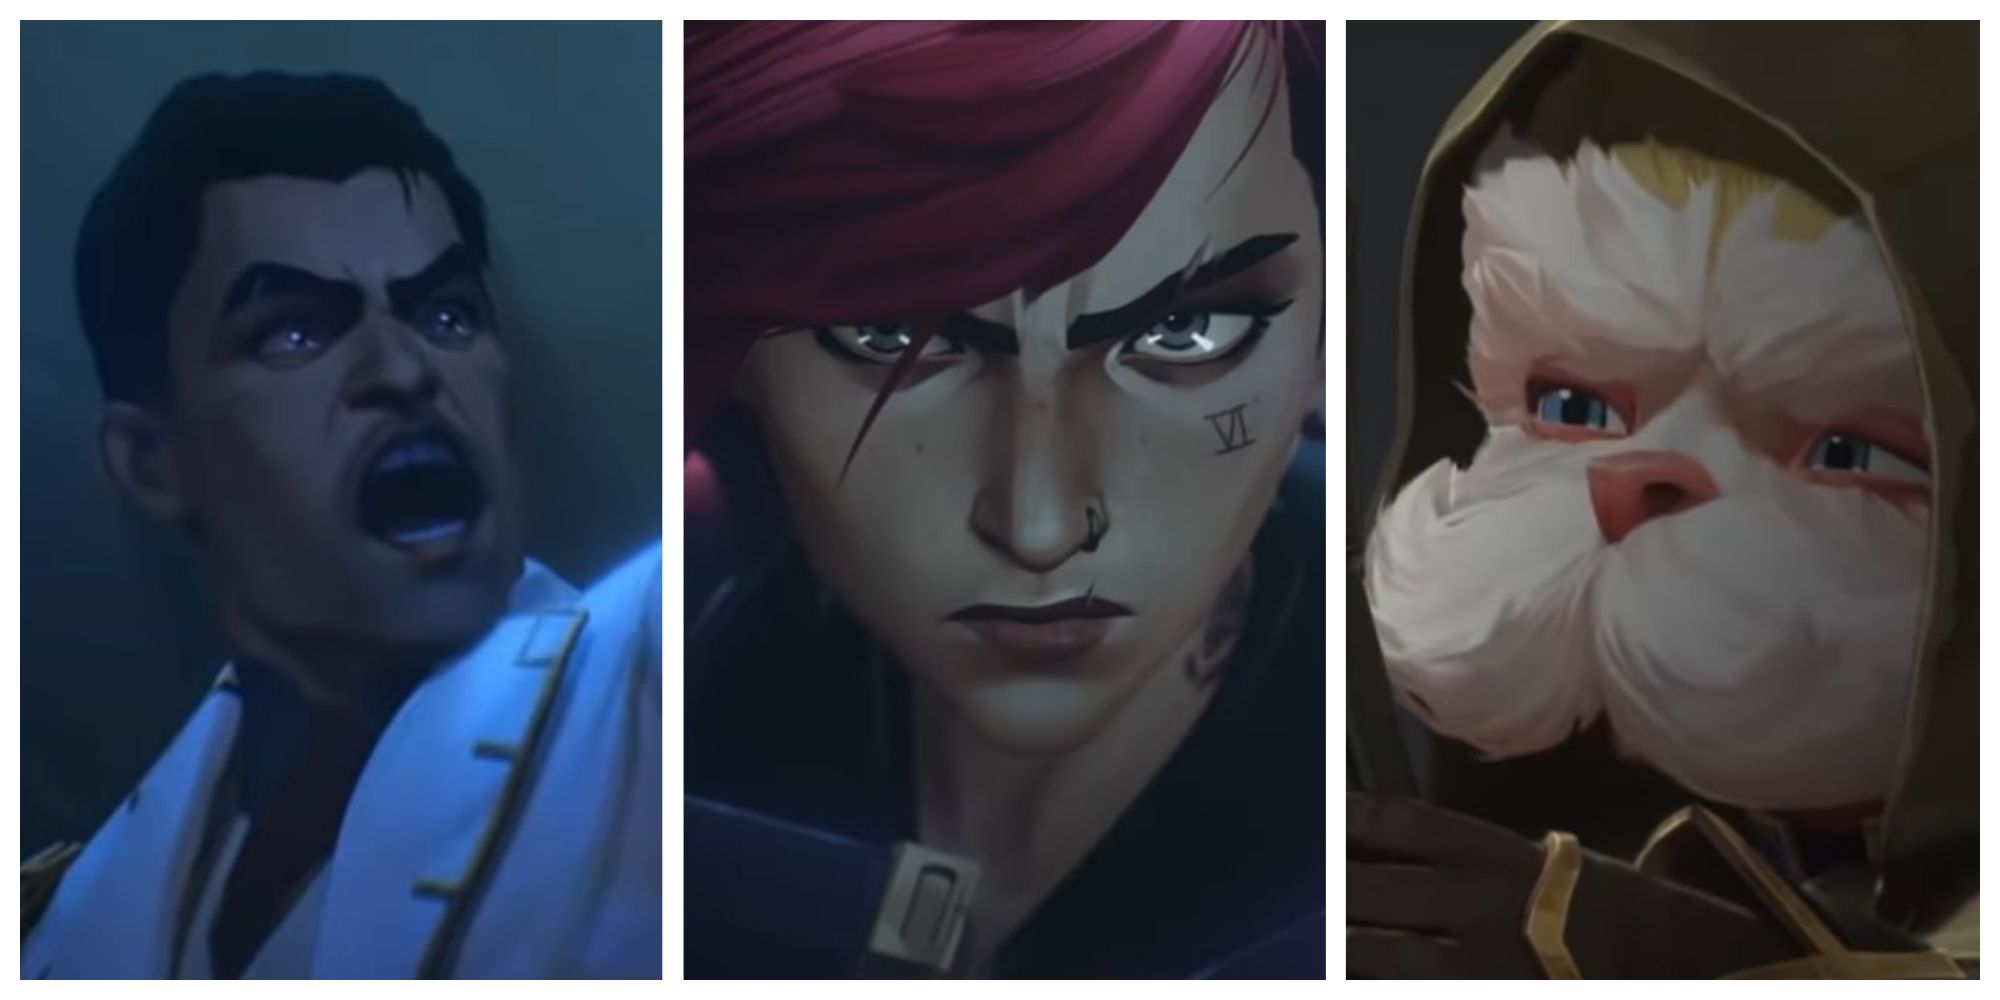 The 8 League of Legends Champions that Appear in Arcane